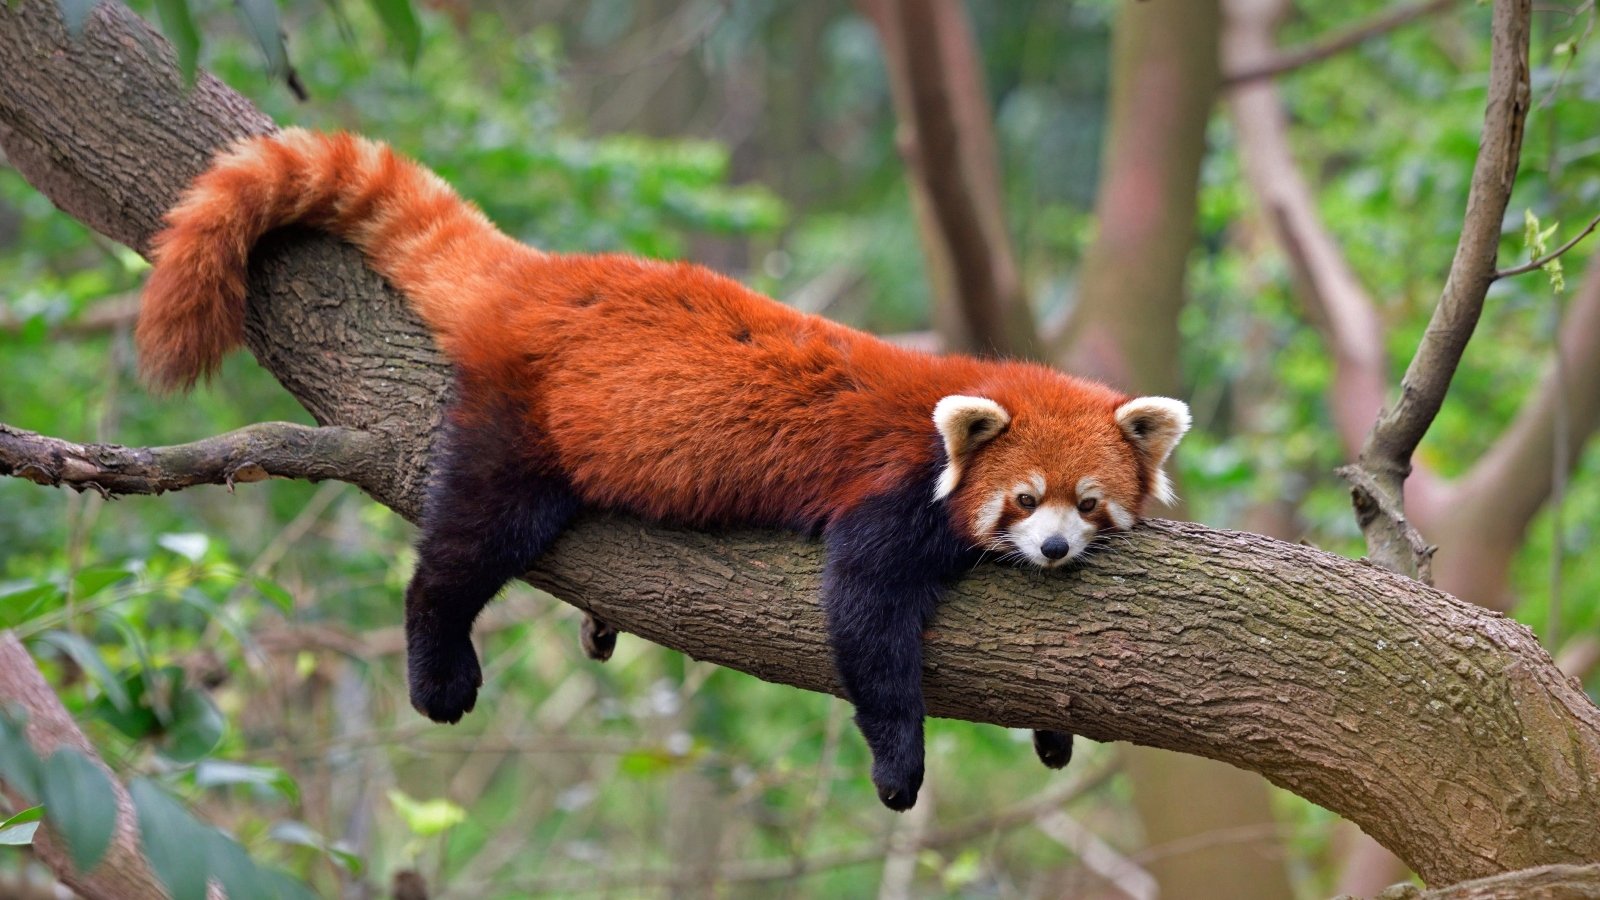 Humans Are Driving Red Pandas To Extinction, Says New Study